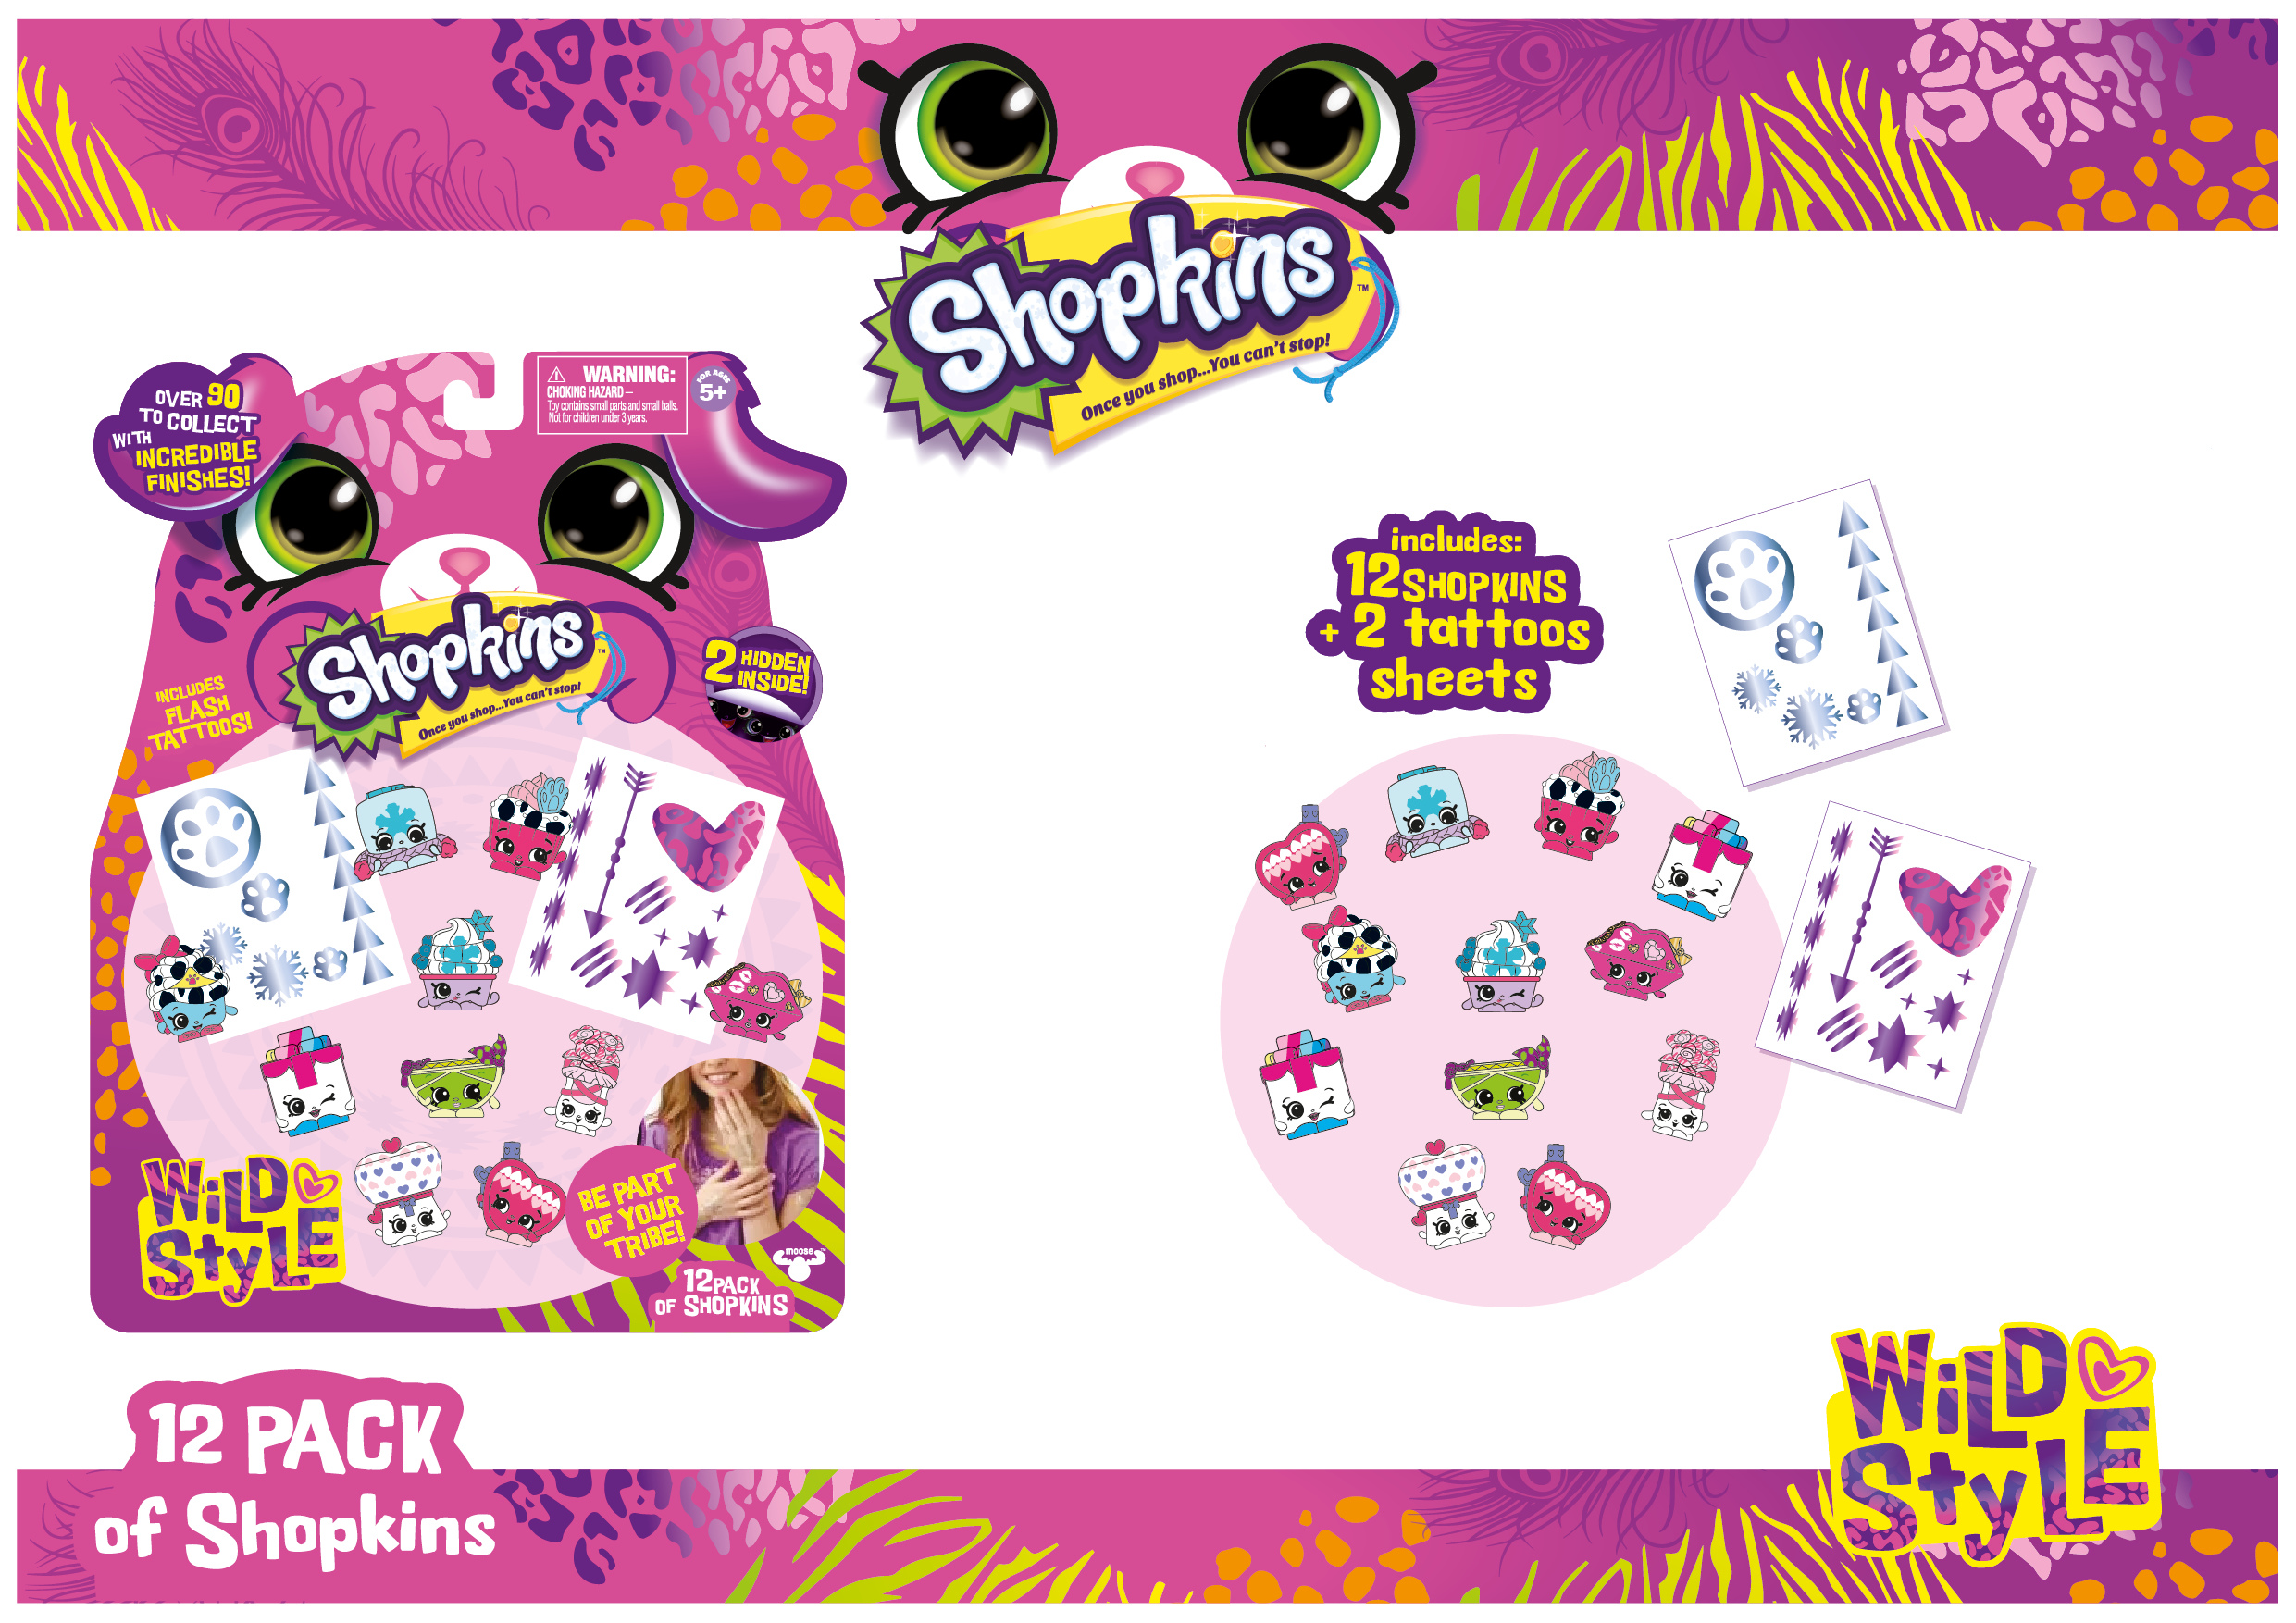 Shopkins Series 9 Wild Style, 12 Pack